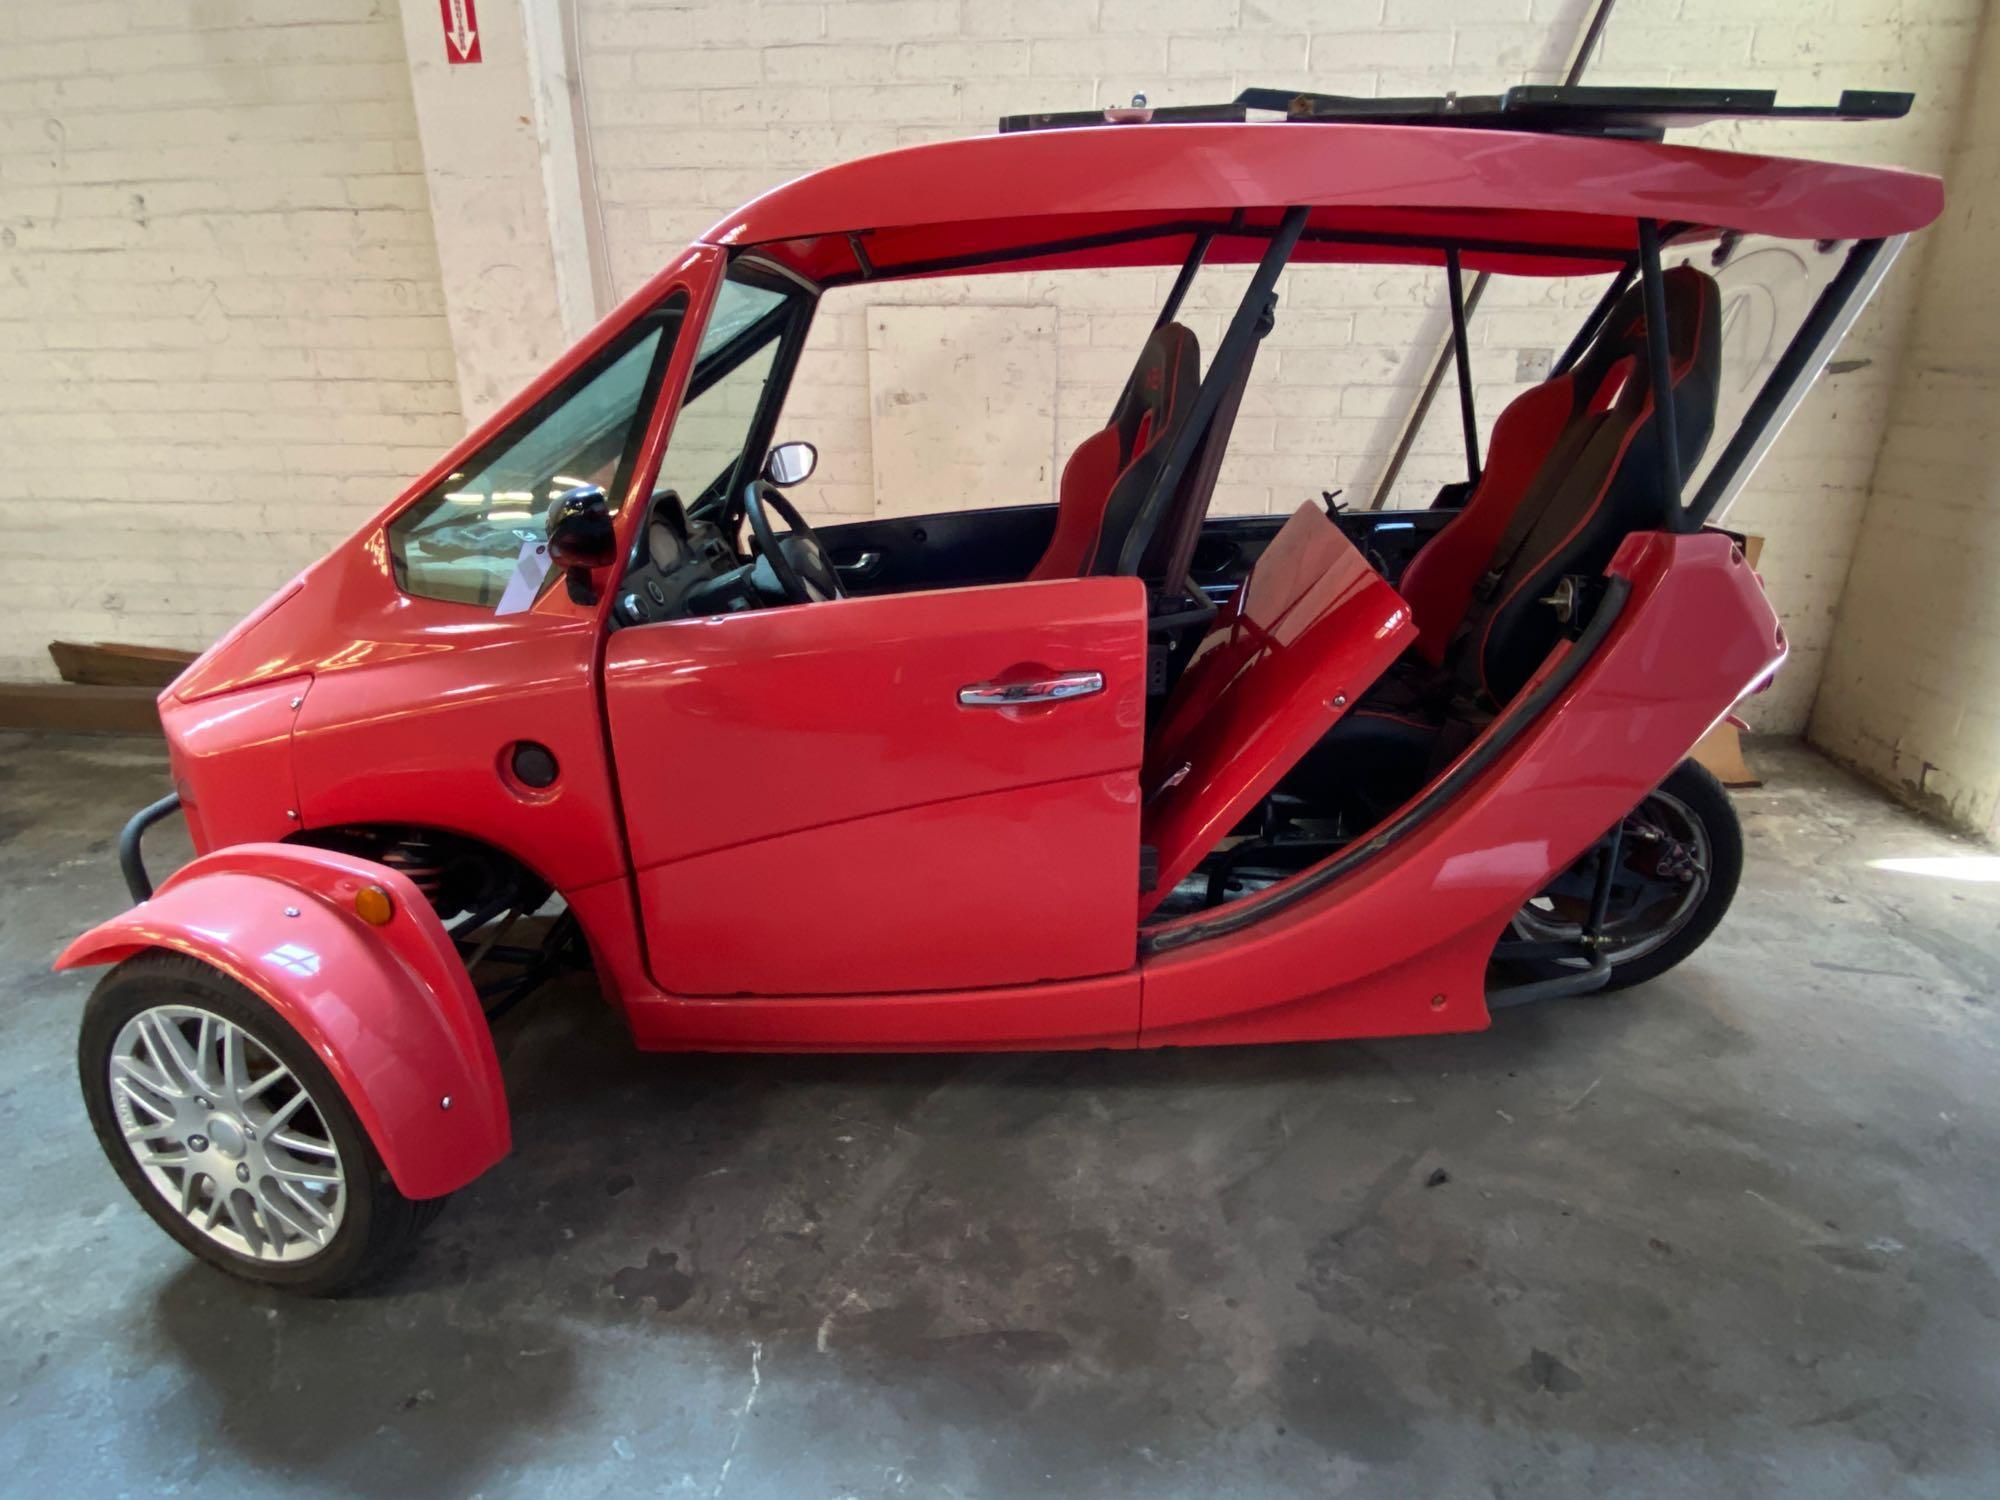 2019 Austin Electric Vehicles Electric Enclosed Three Wheel Autocycle*MISSING BATTERIES*